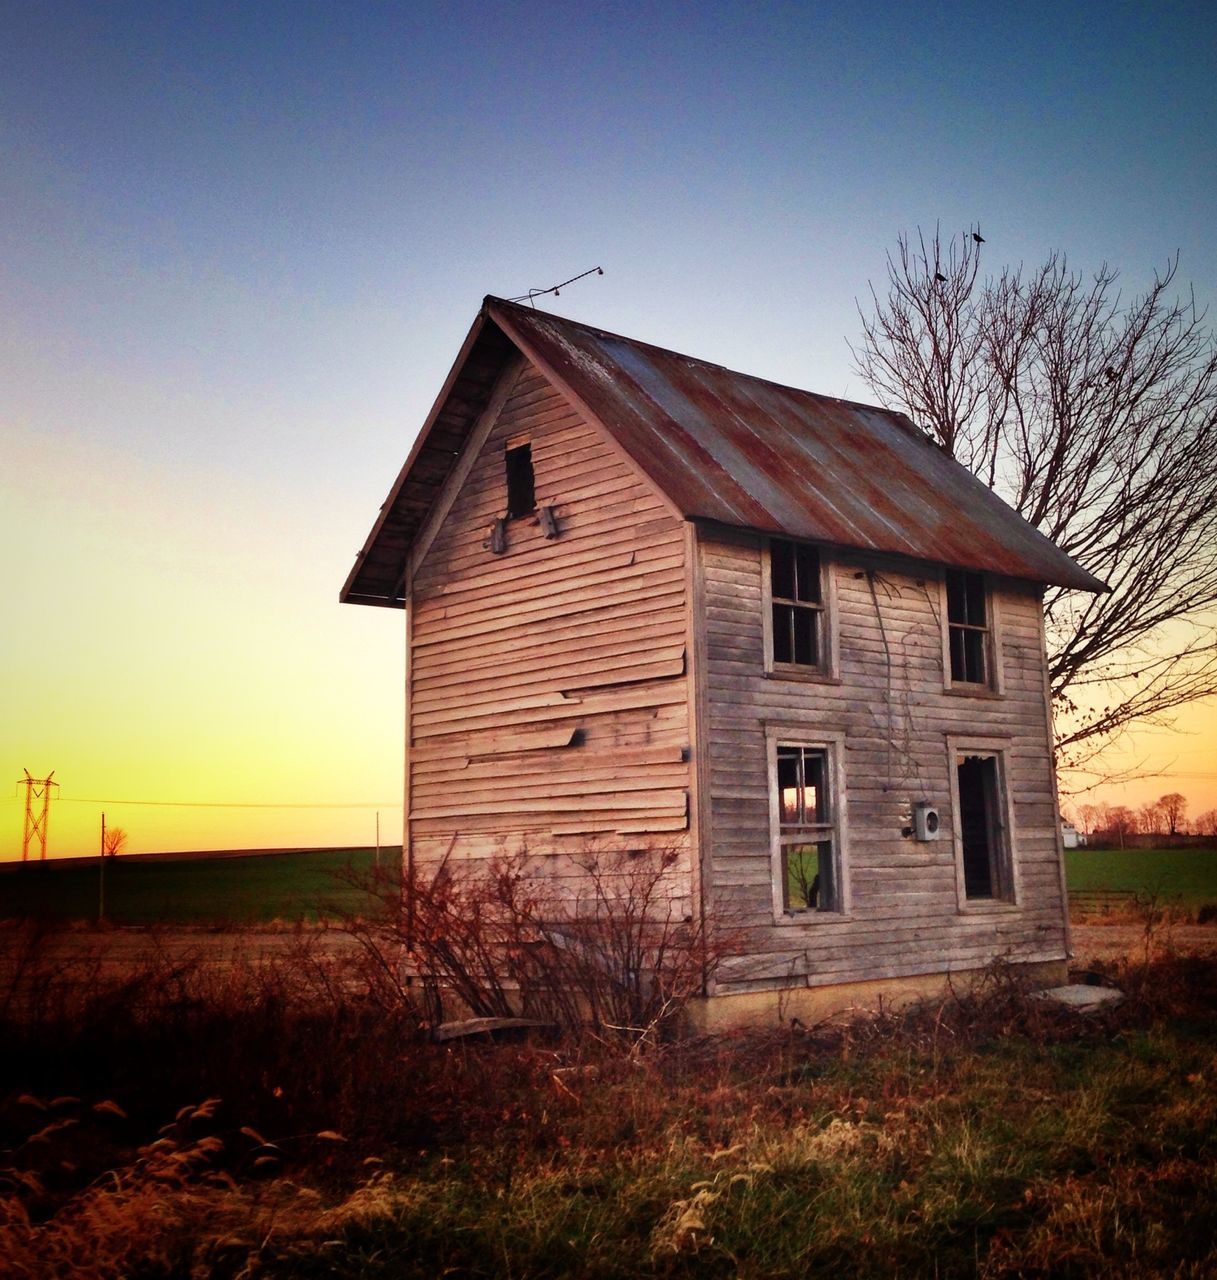 architecture, built structure, building exterior, house, clear sky, field, barn, rural scene, grass, sky, bare tree, abandoned, residential structure, old, tree, landscape, outdoors, no people, exterior, sunlight